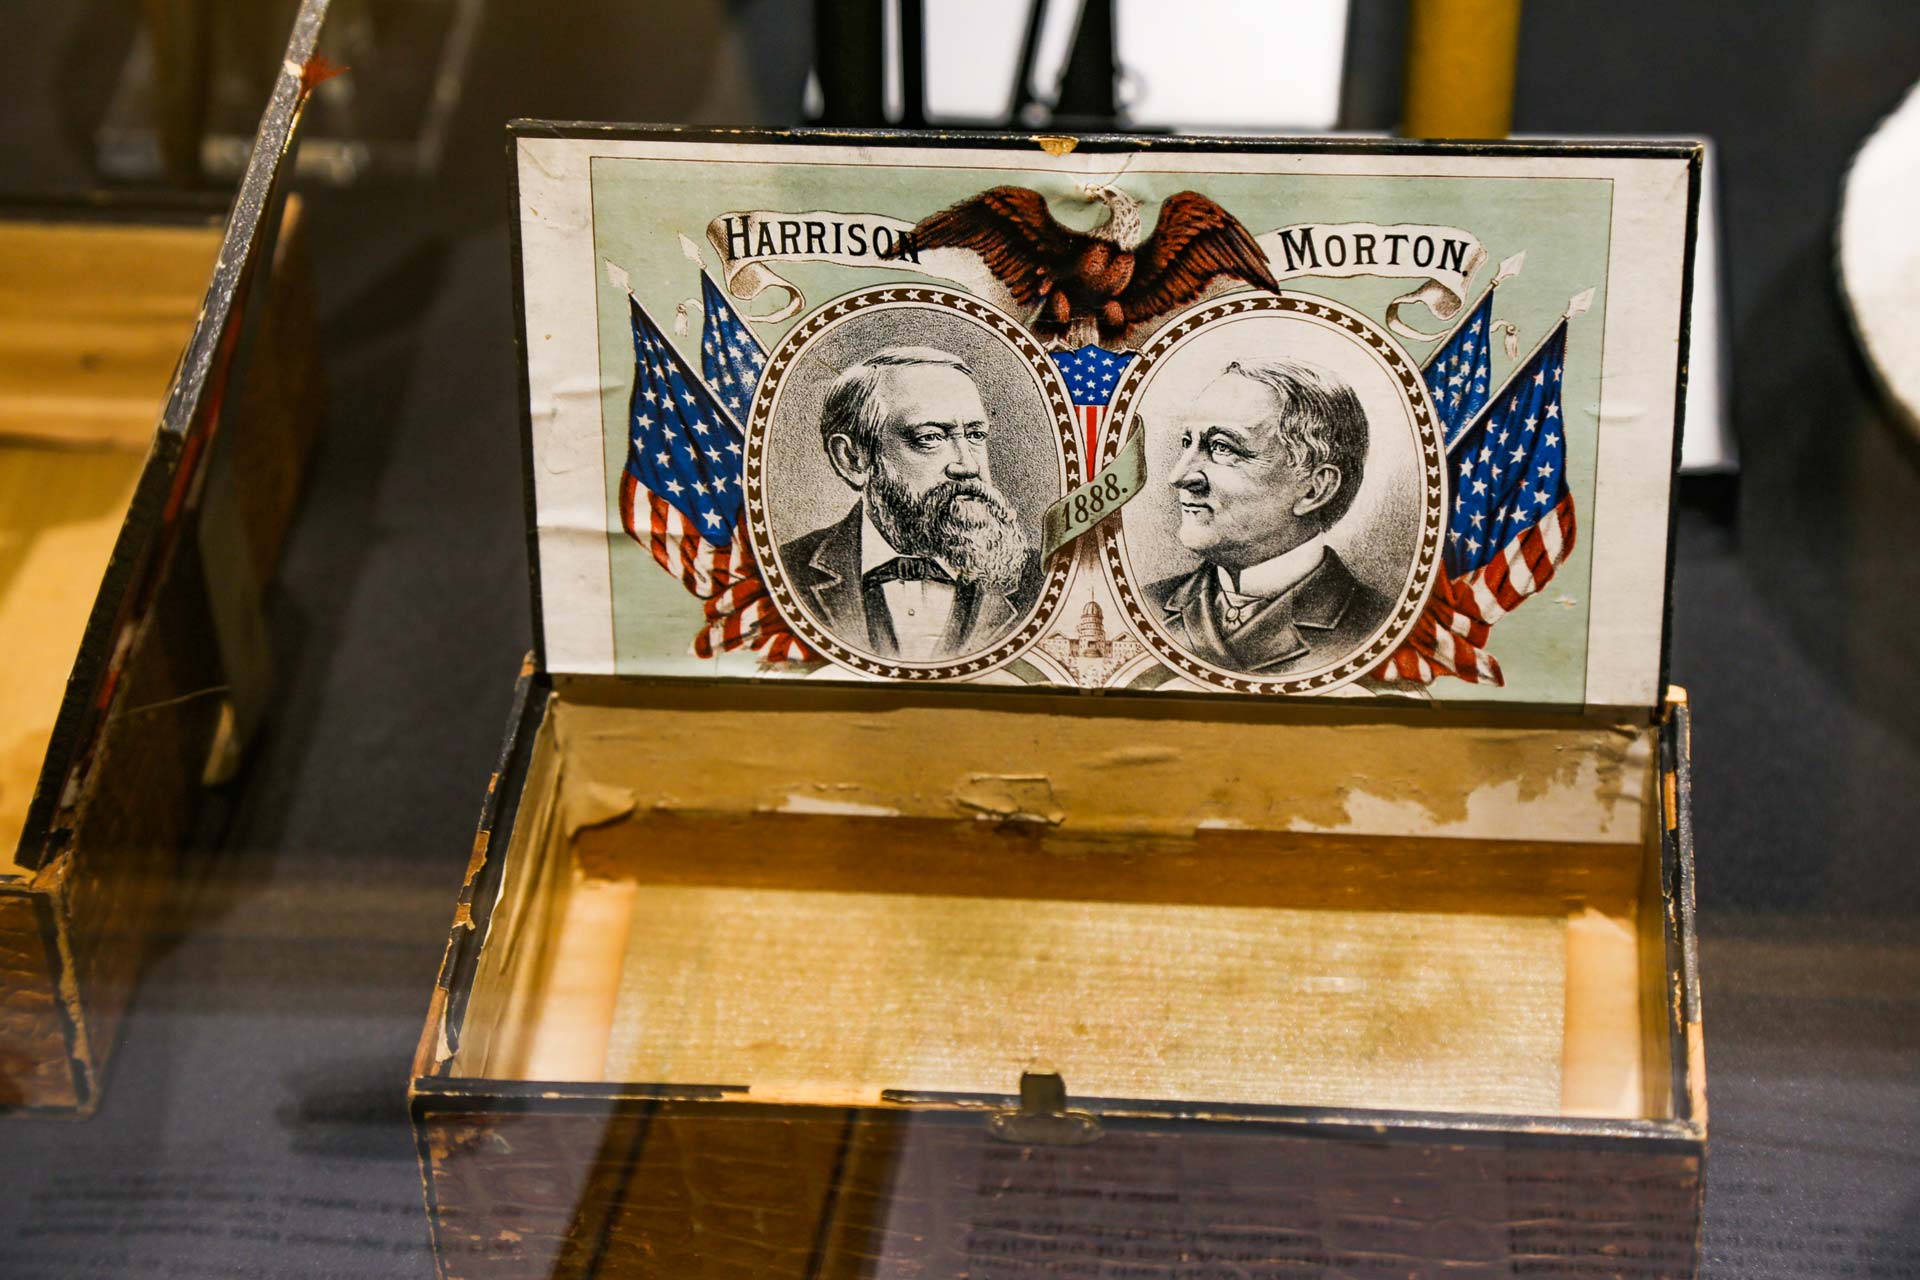 box with an image of Harrison and Morton inside